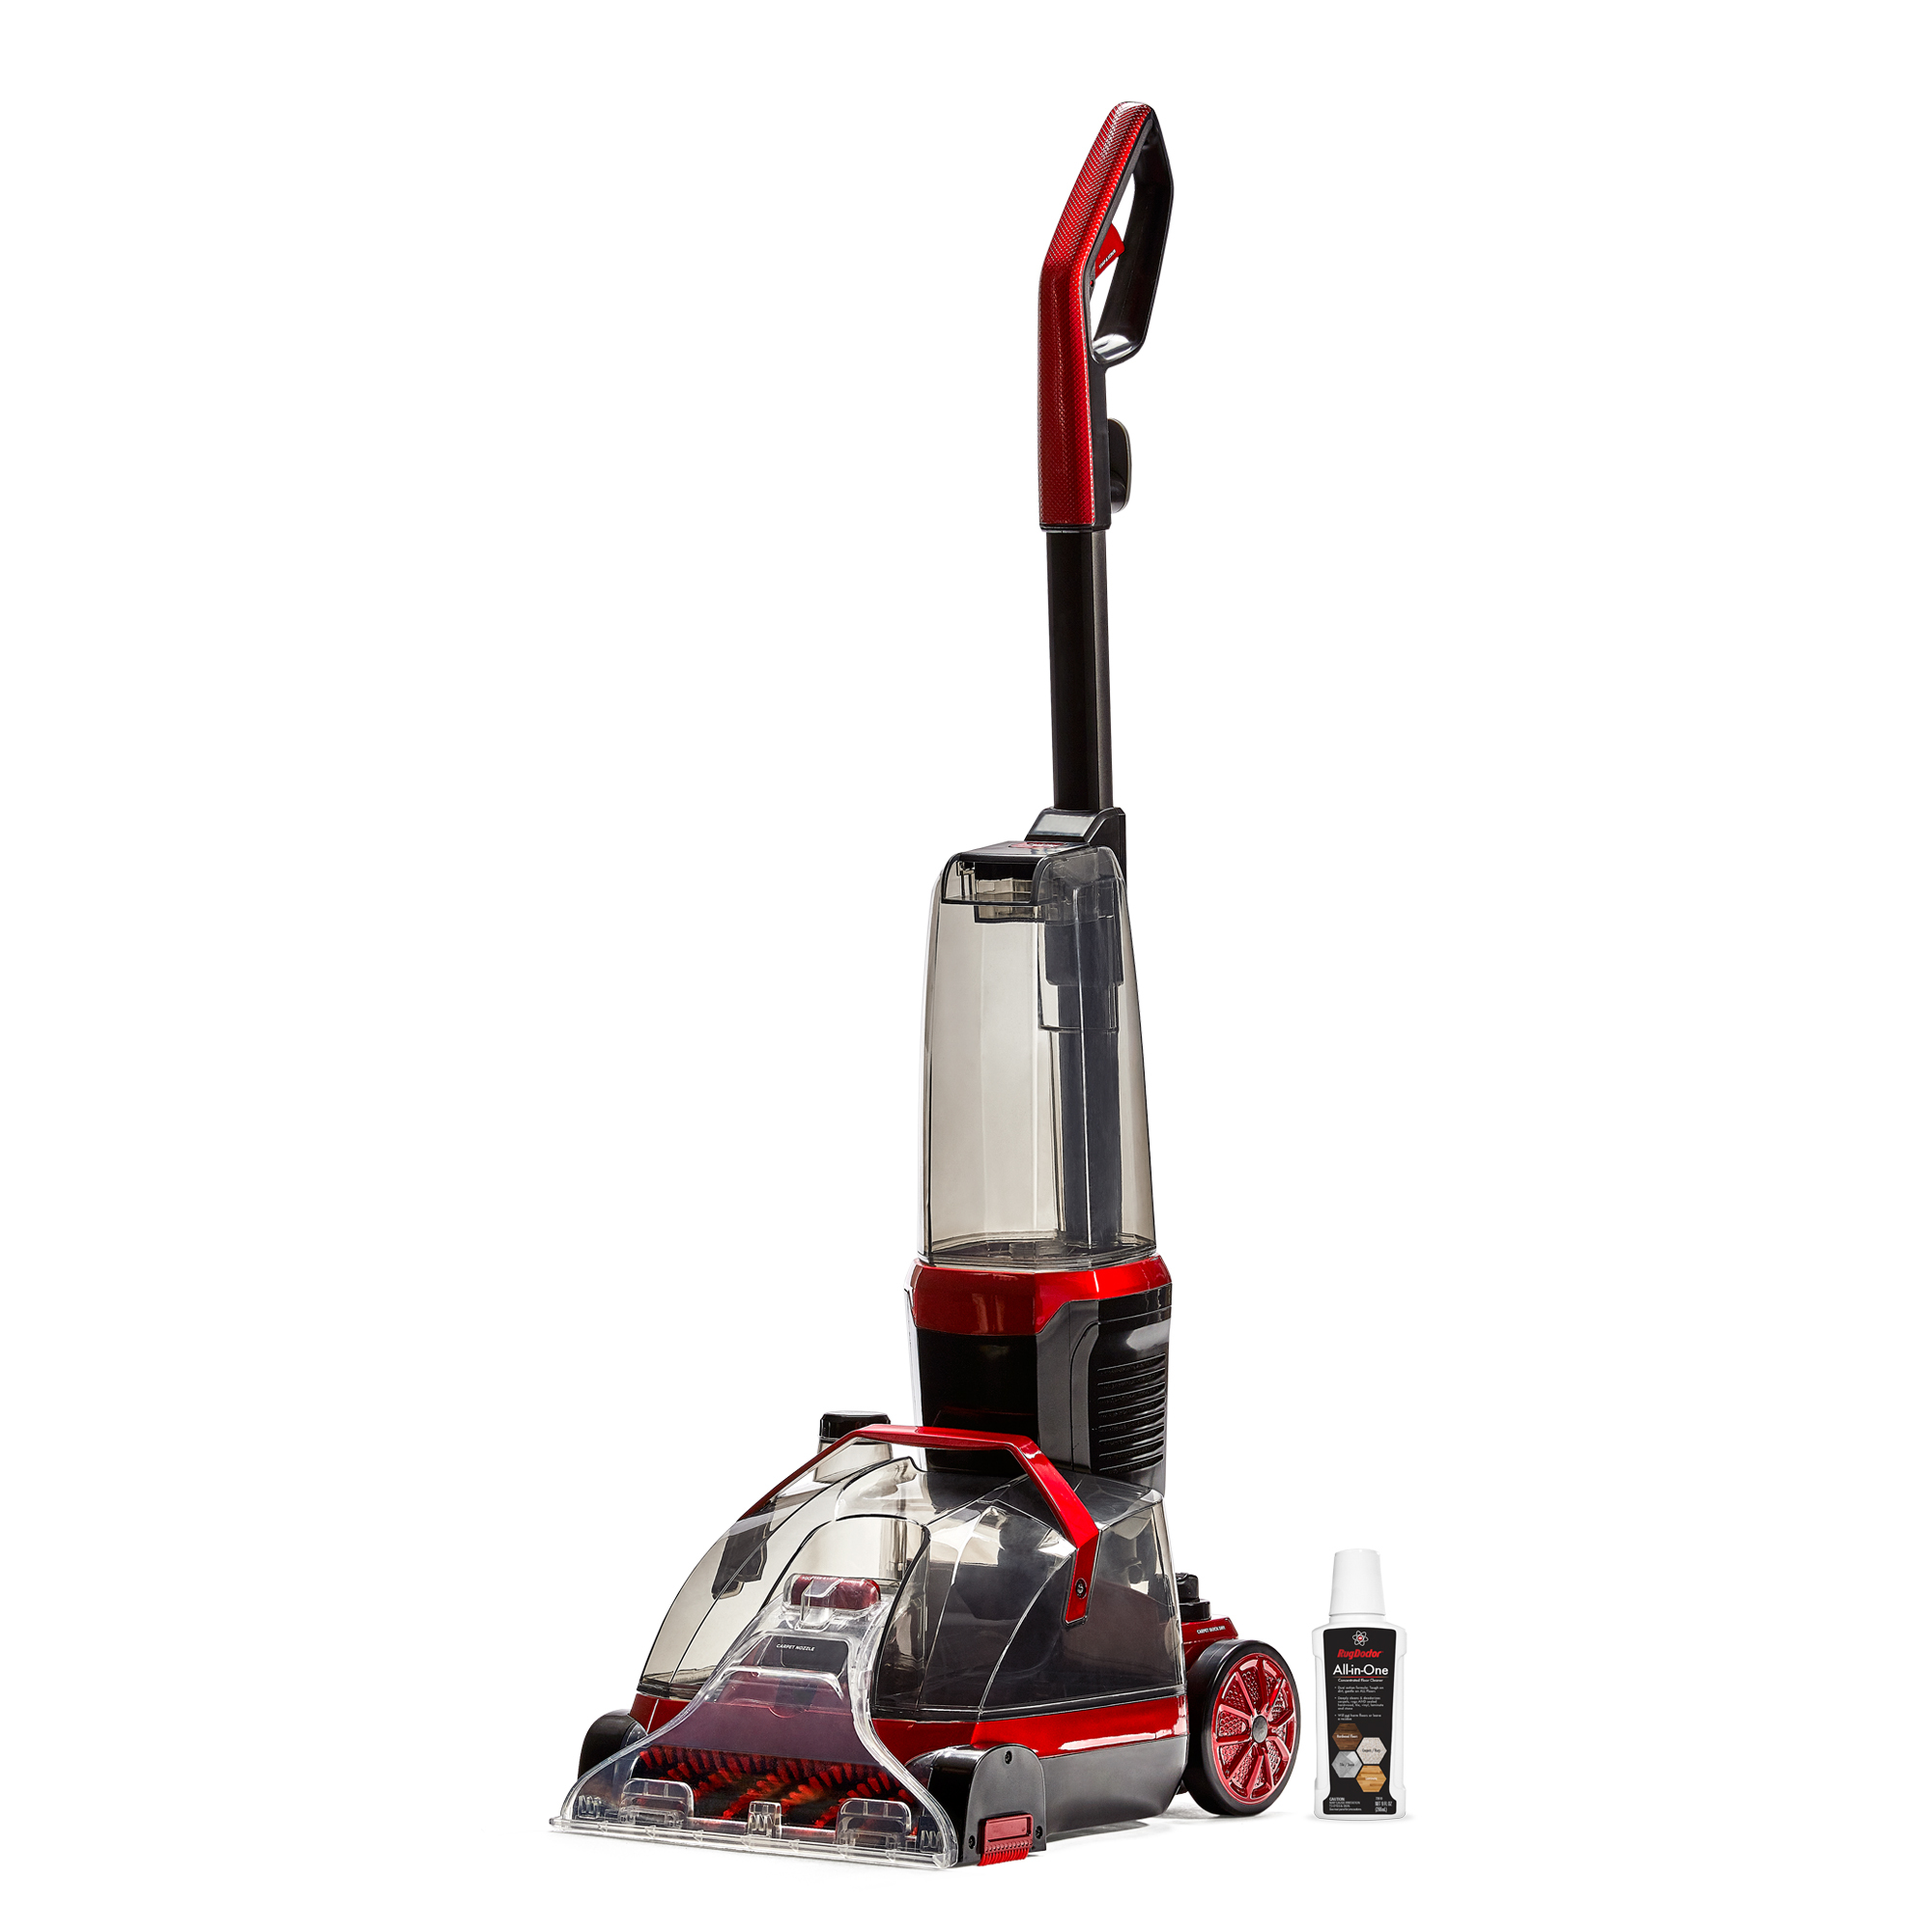 Rug Doctor FlexClean Dual Action Hardfloor and Carpet Cleaner Machine - image 6 of 11